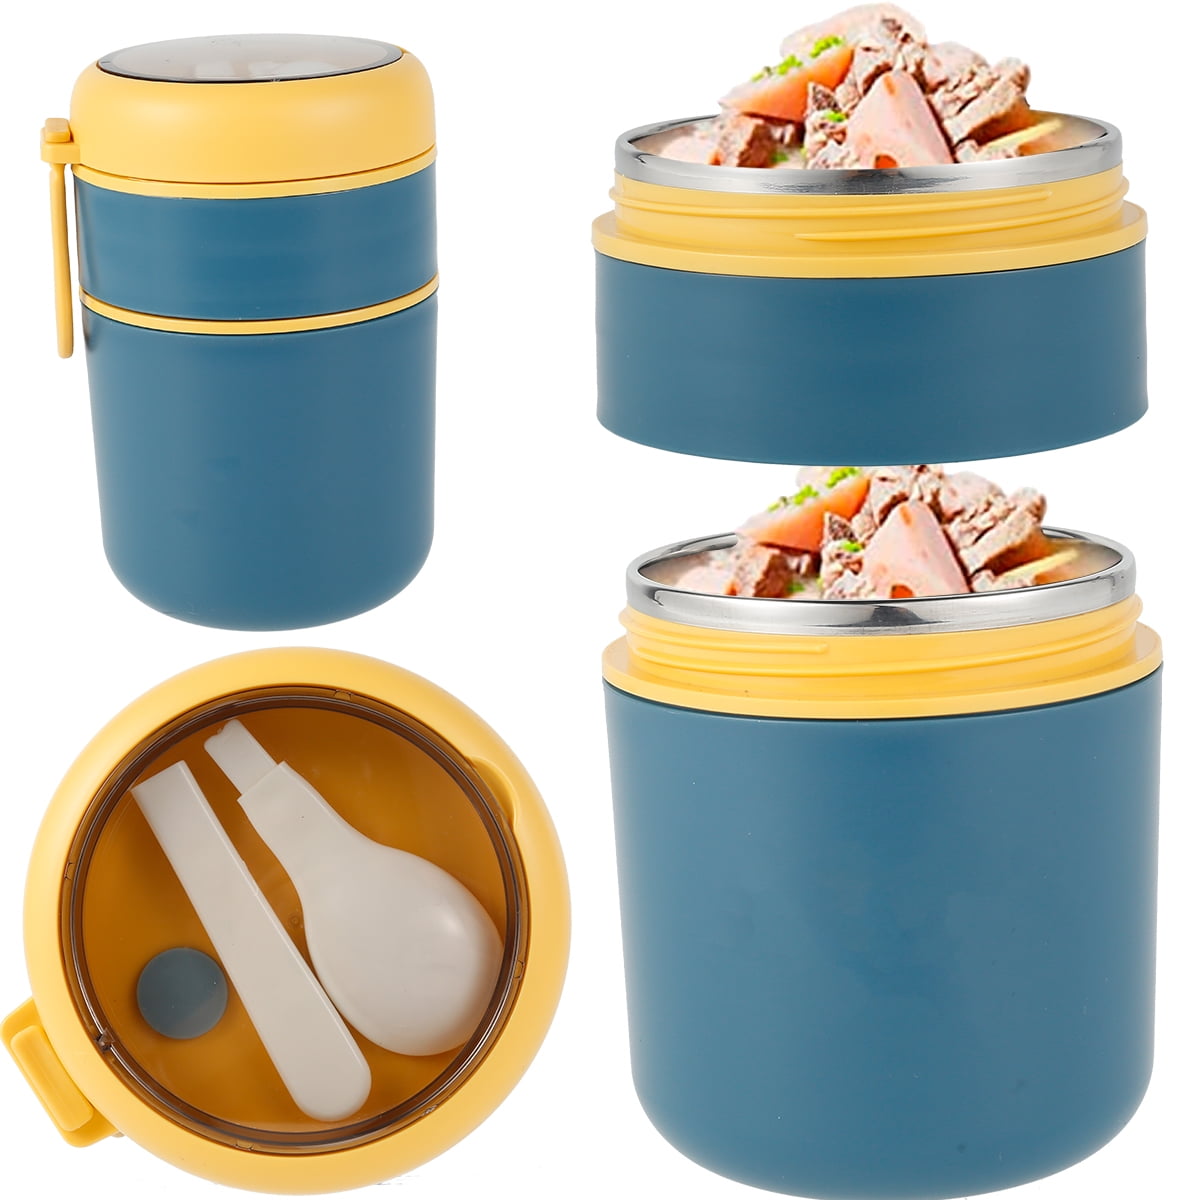 Duety Vacuum Insulated Lunch Box Food Container with Foldable Spoon Stainless Steel Thermal Soup Container Thermos Cup Jar Bowl Hot Cold Food for